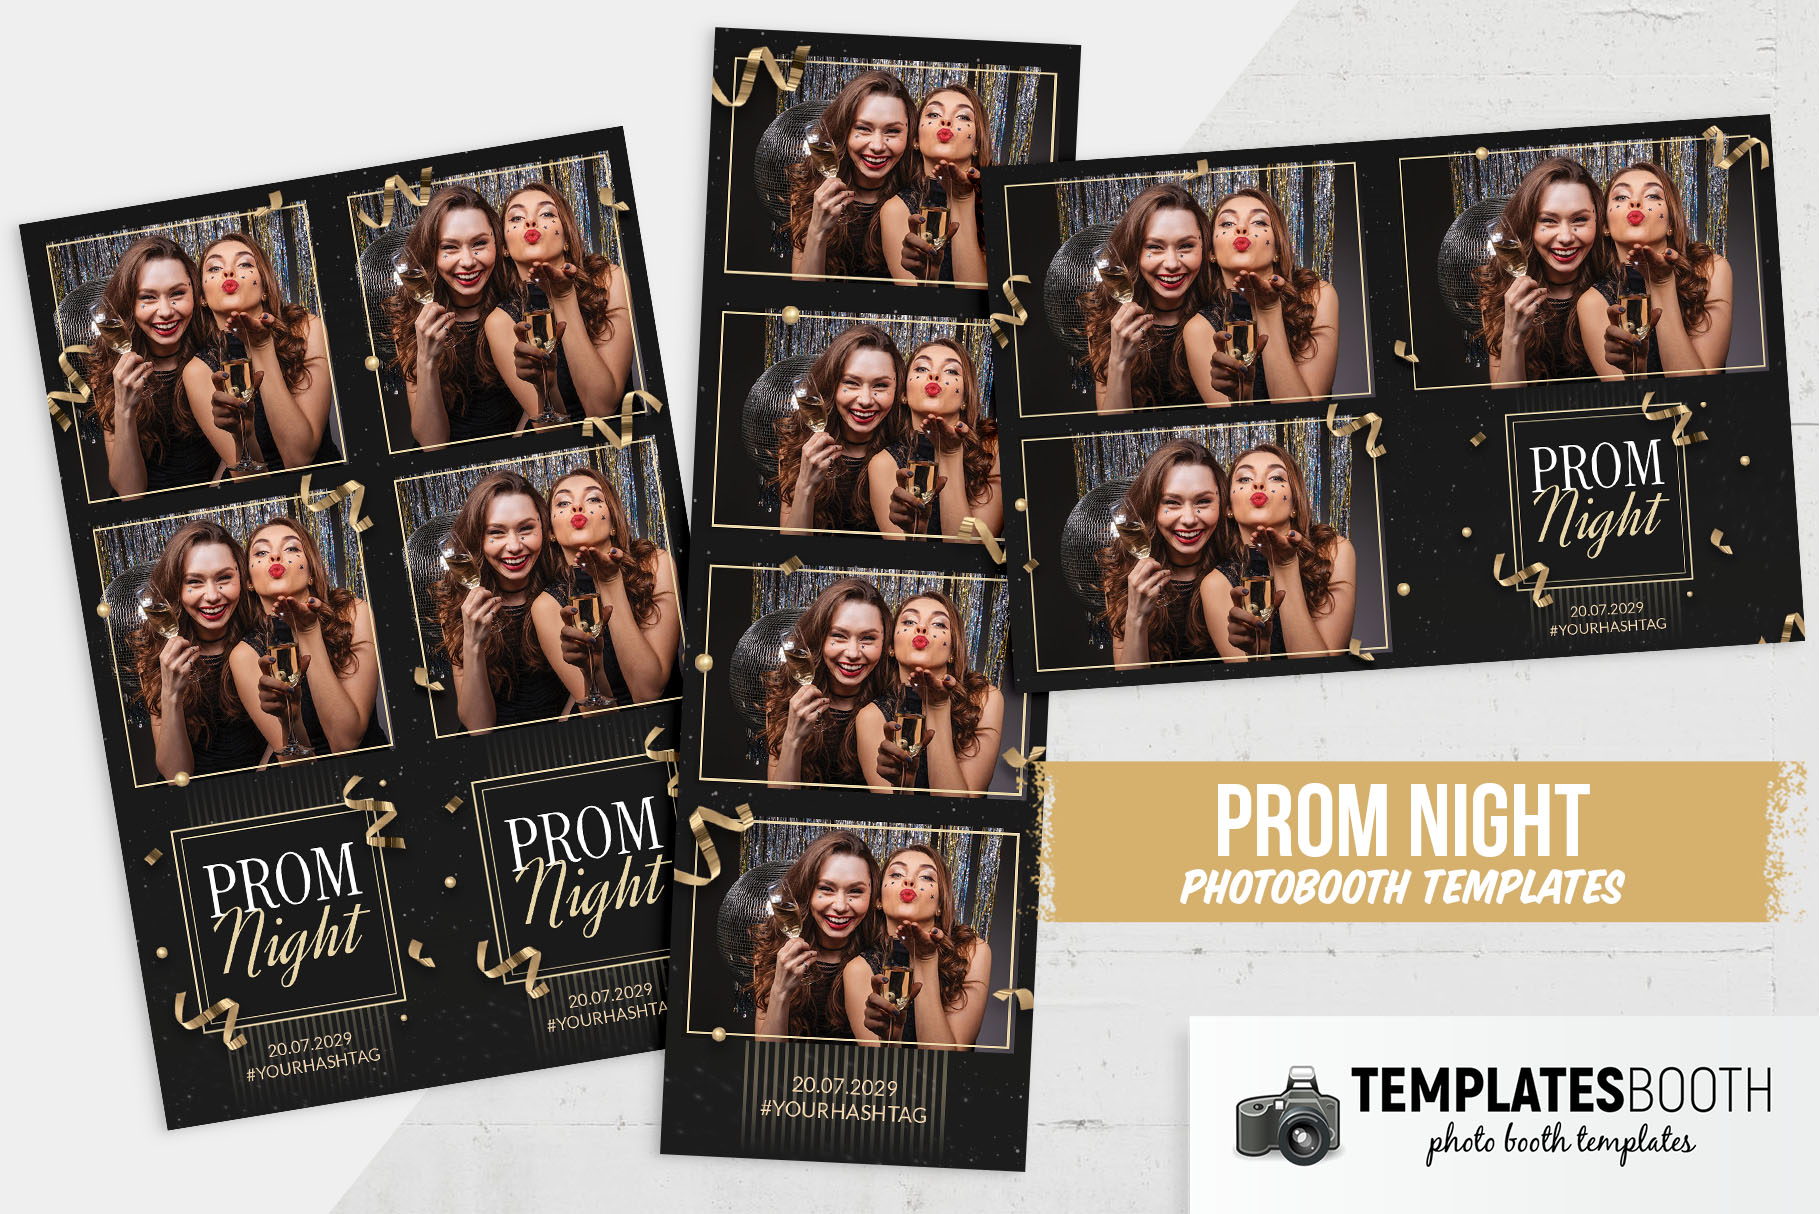 Prom Night Photo Booth Template TemplatesBooth